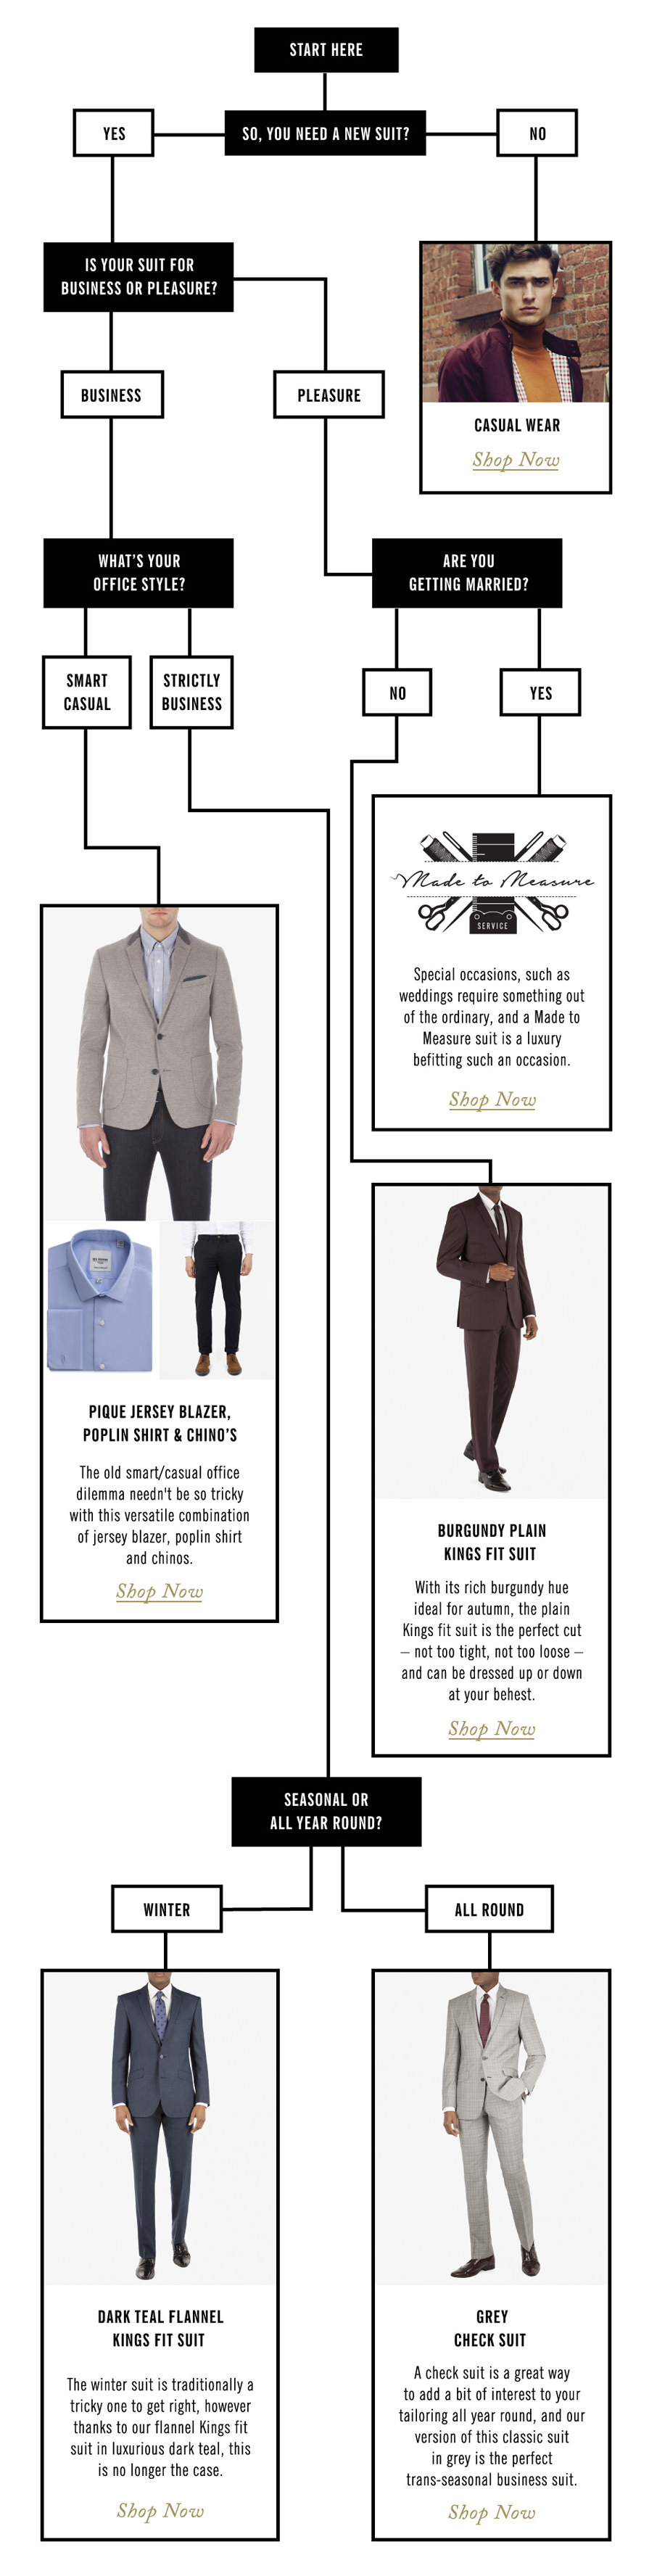 OUR GUIDE TO CHOOSING THE BEST SUIT FOR YOU